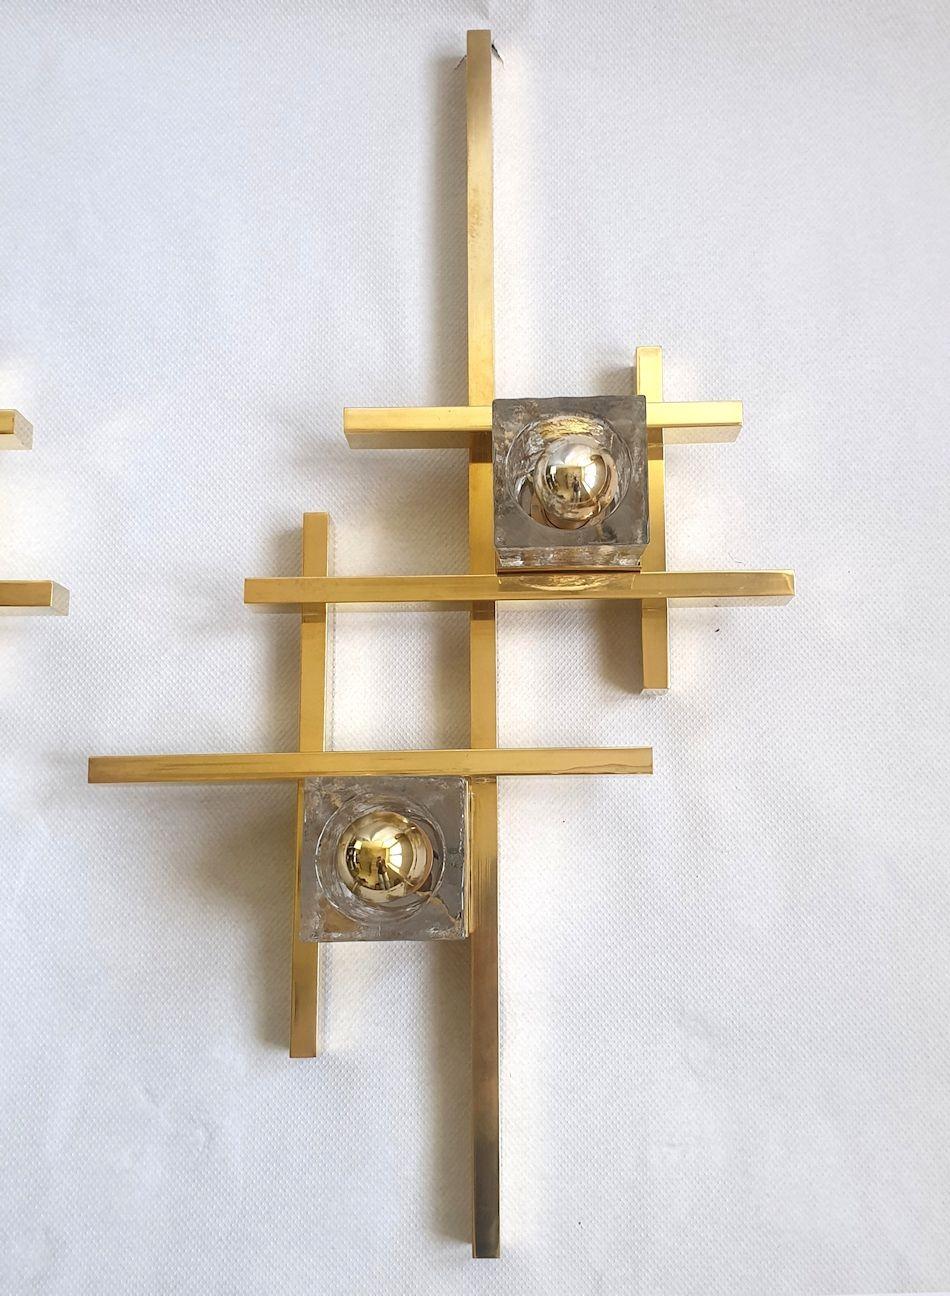 Late 20th Century Mid Century Modern Brass and Glass Large Sconces, Sciolari Style, a Pair